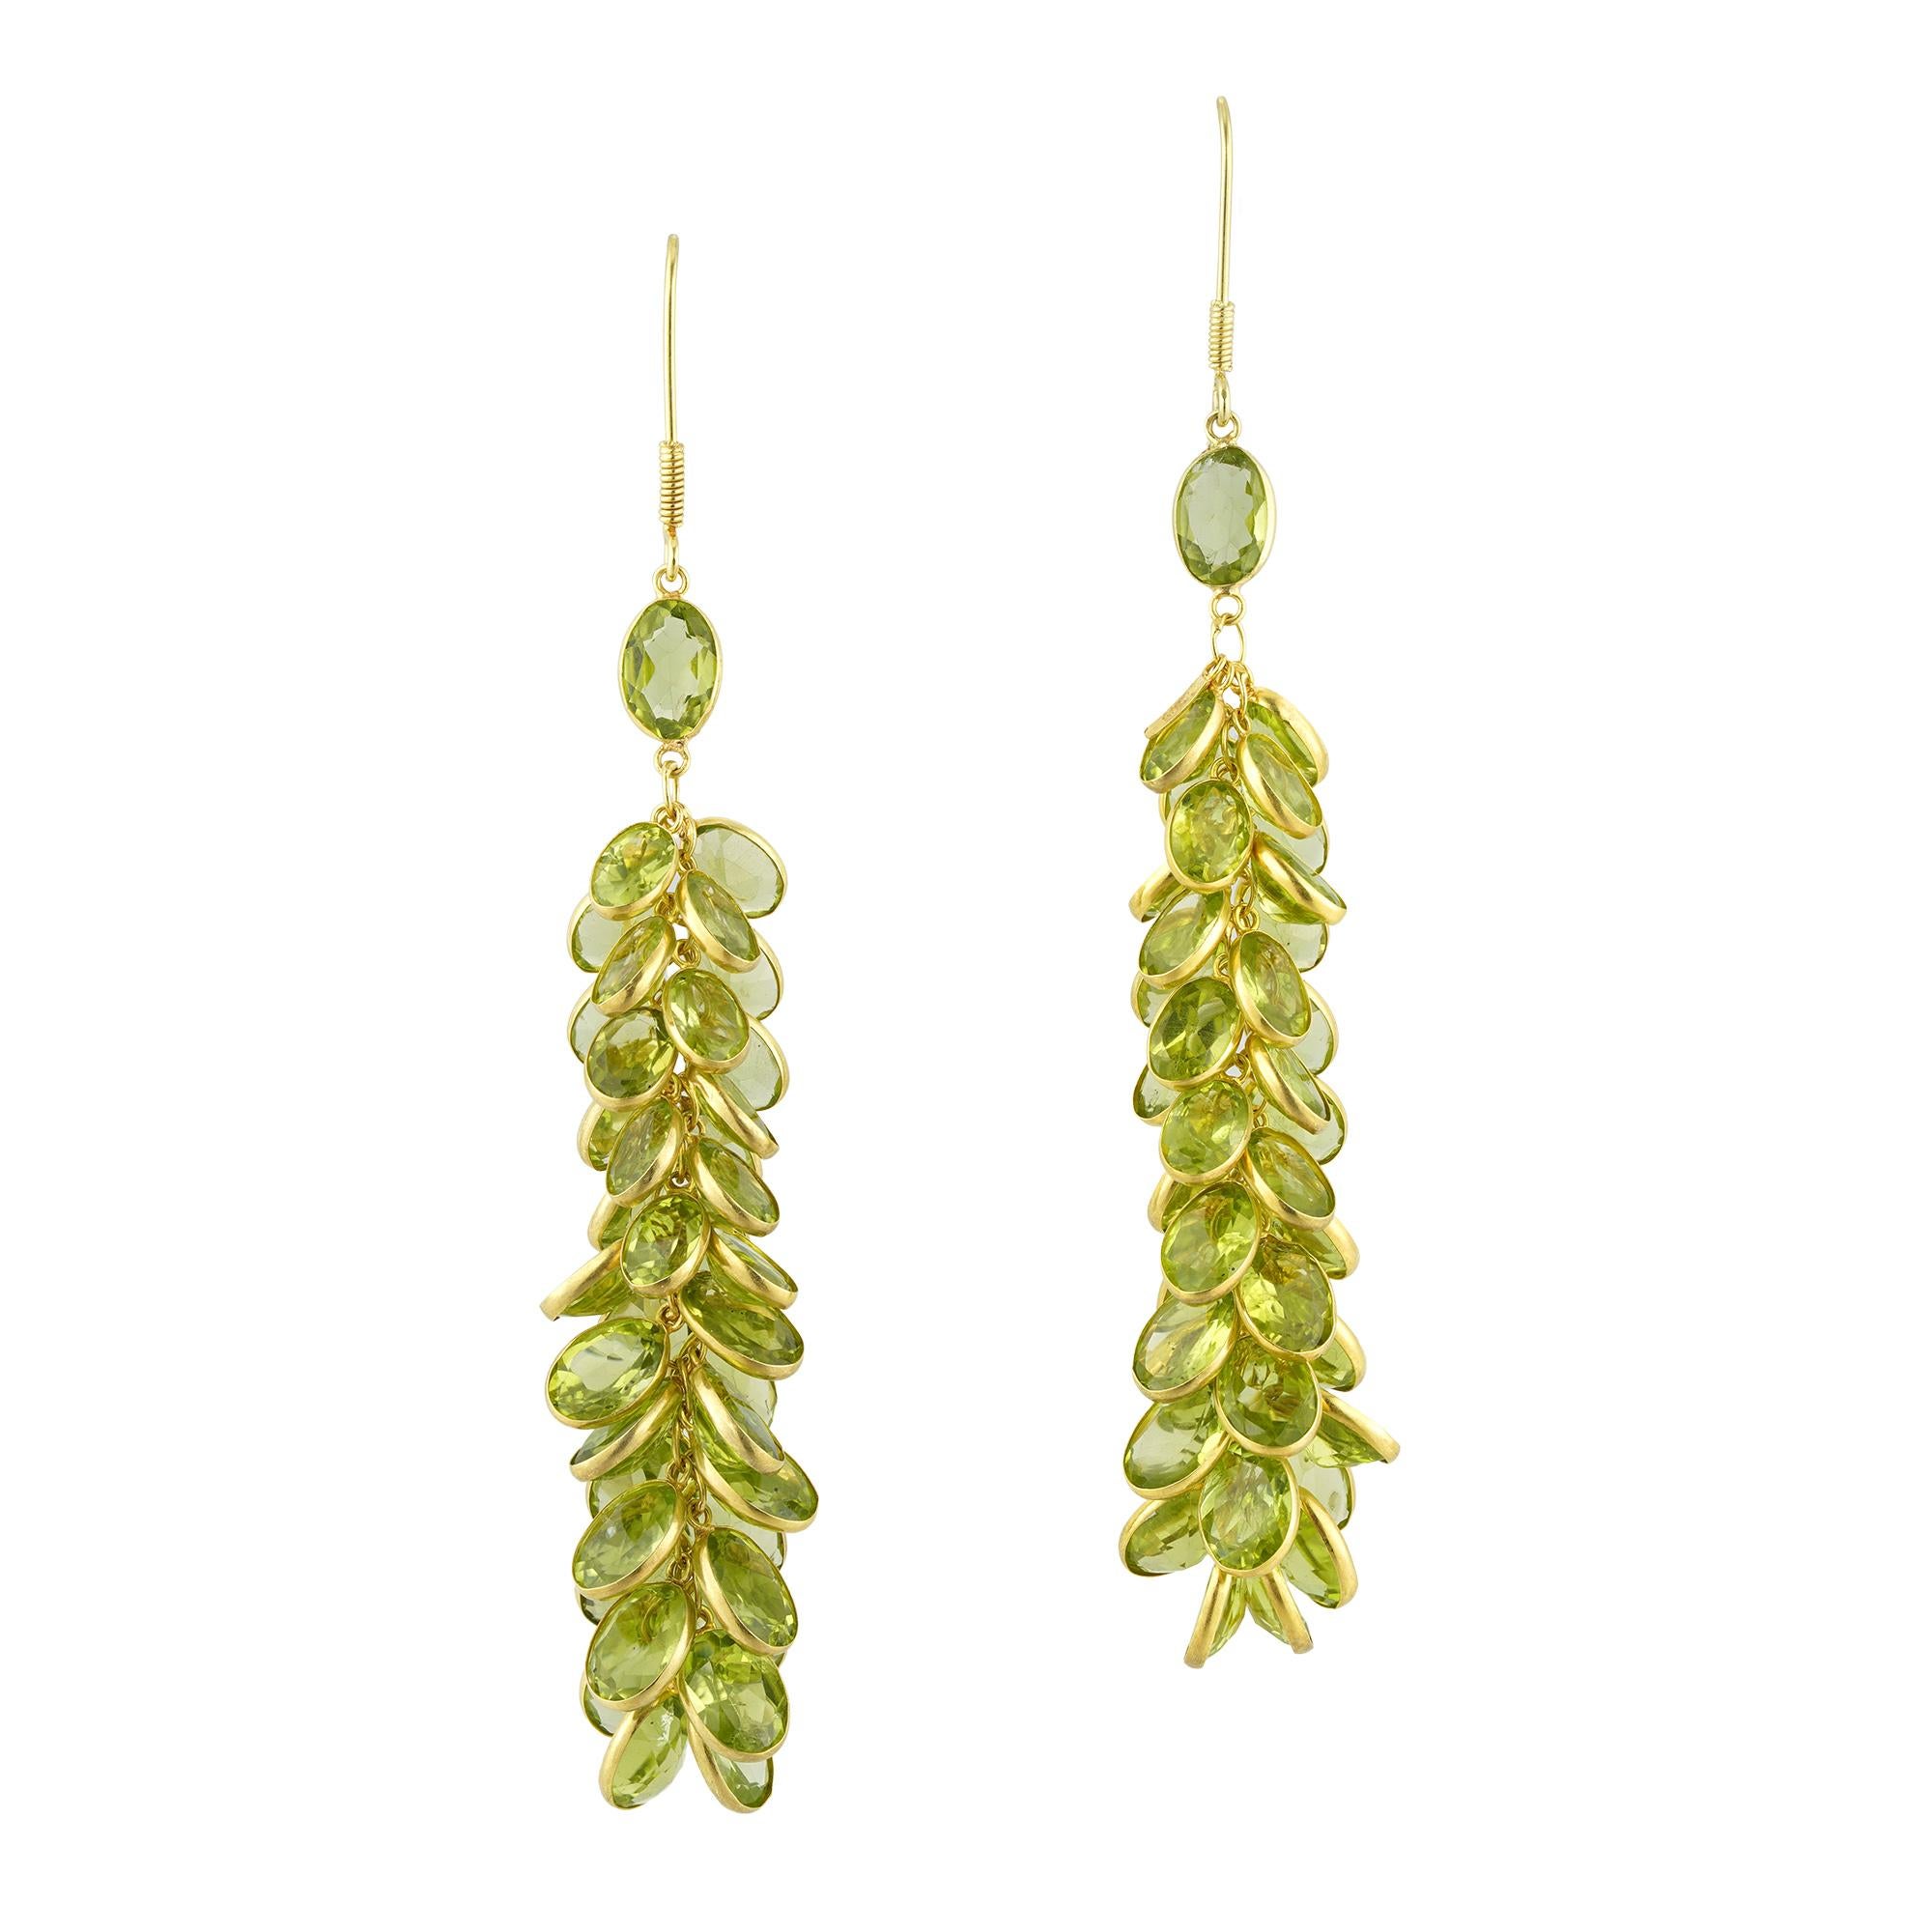 Peridot cascade earrings, each oval mixed cut gemstone spectacle set, with yellow gold and linked with chain, stamped as 14ct, bearing the Bentley and Skinner sponsors mark, measuring 57mmx15mm, weighing 5.7g and 6.5g each.

This pair of earrings is